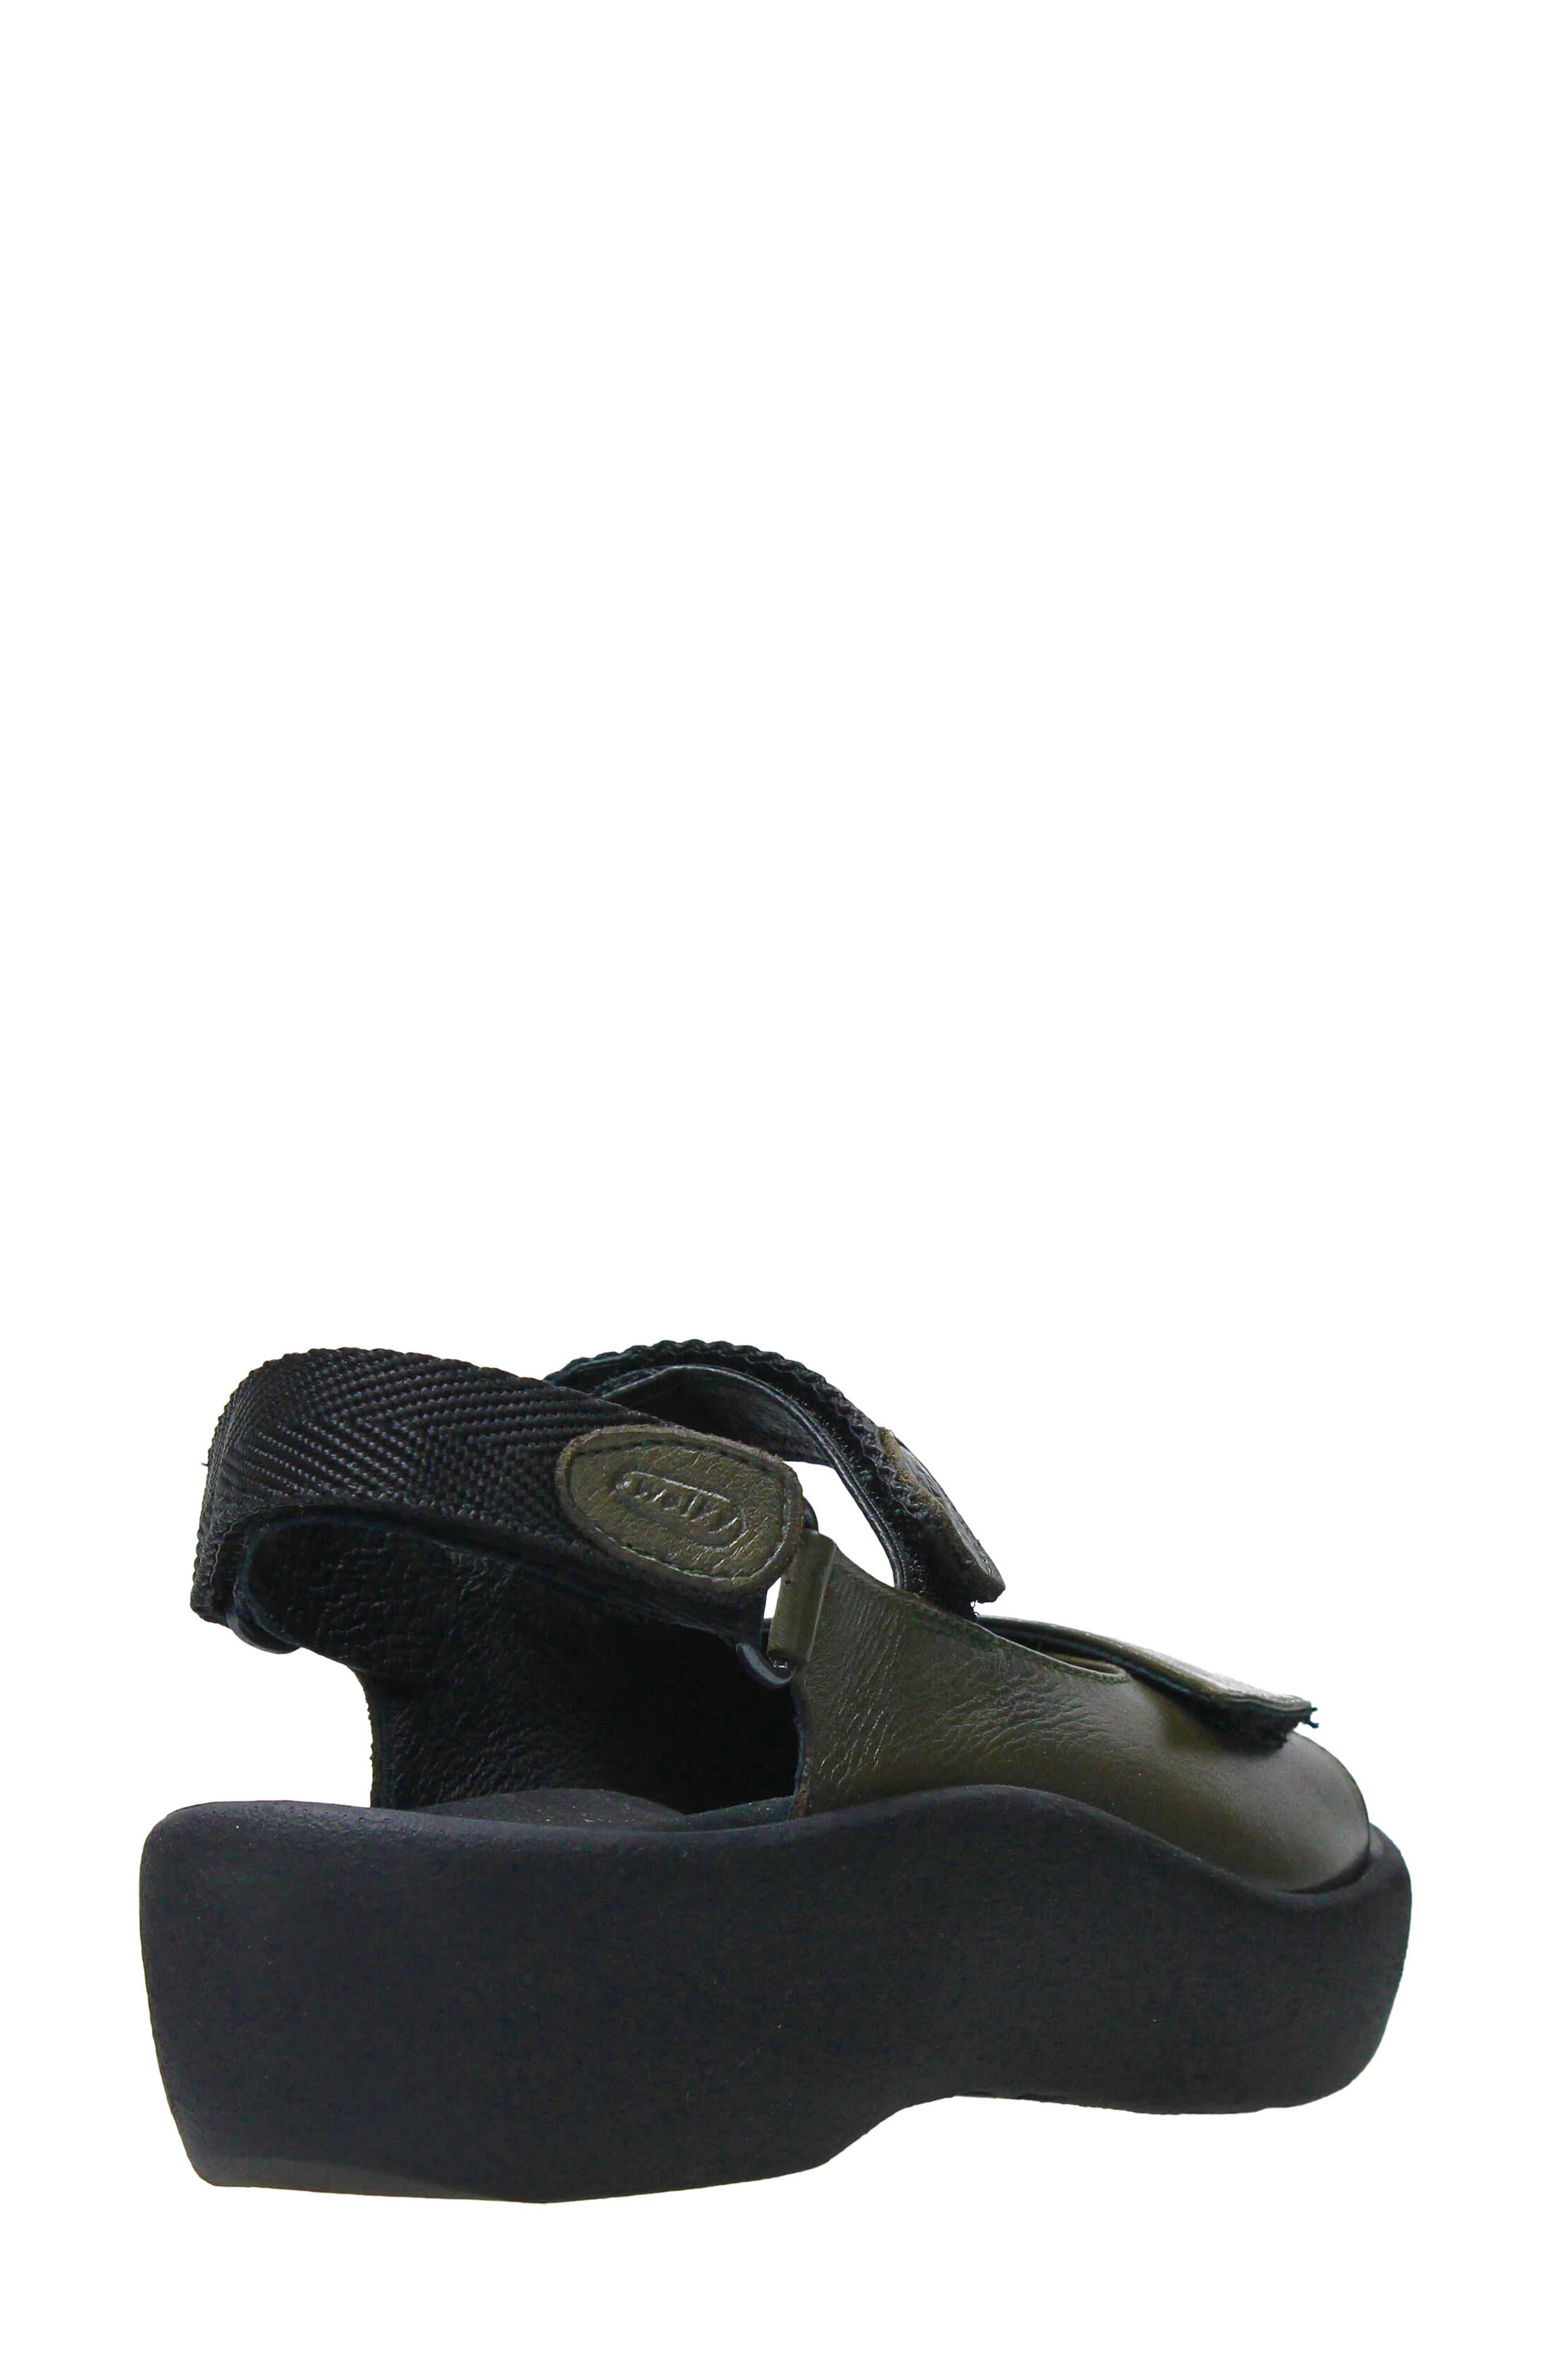 Toevlucht Begrip helemaal Wolky Jewel Sandal in Black | Lyst